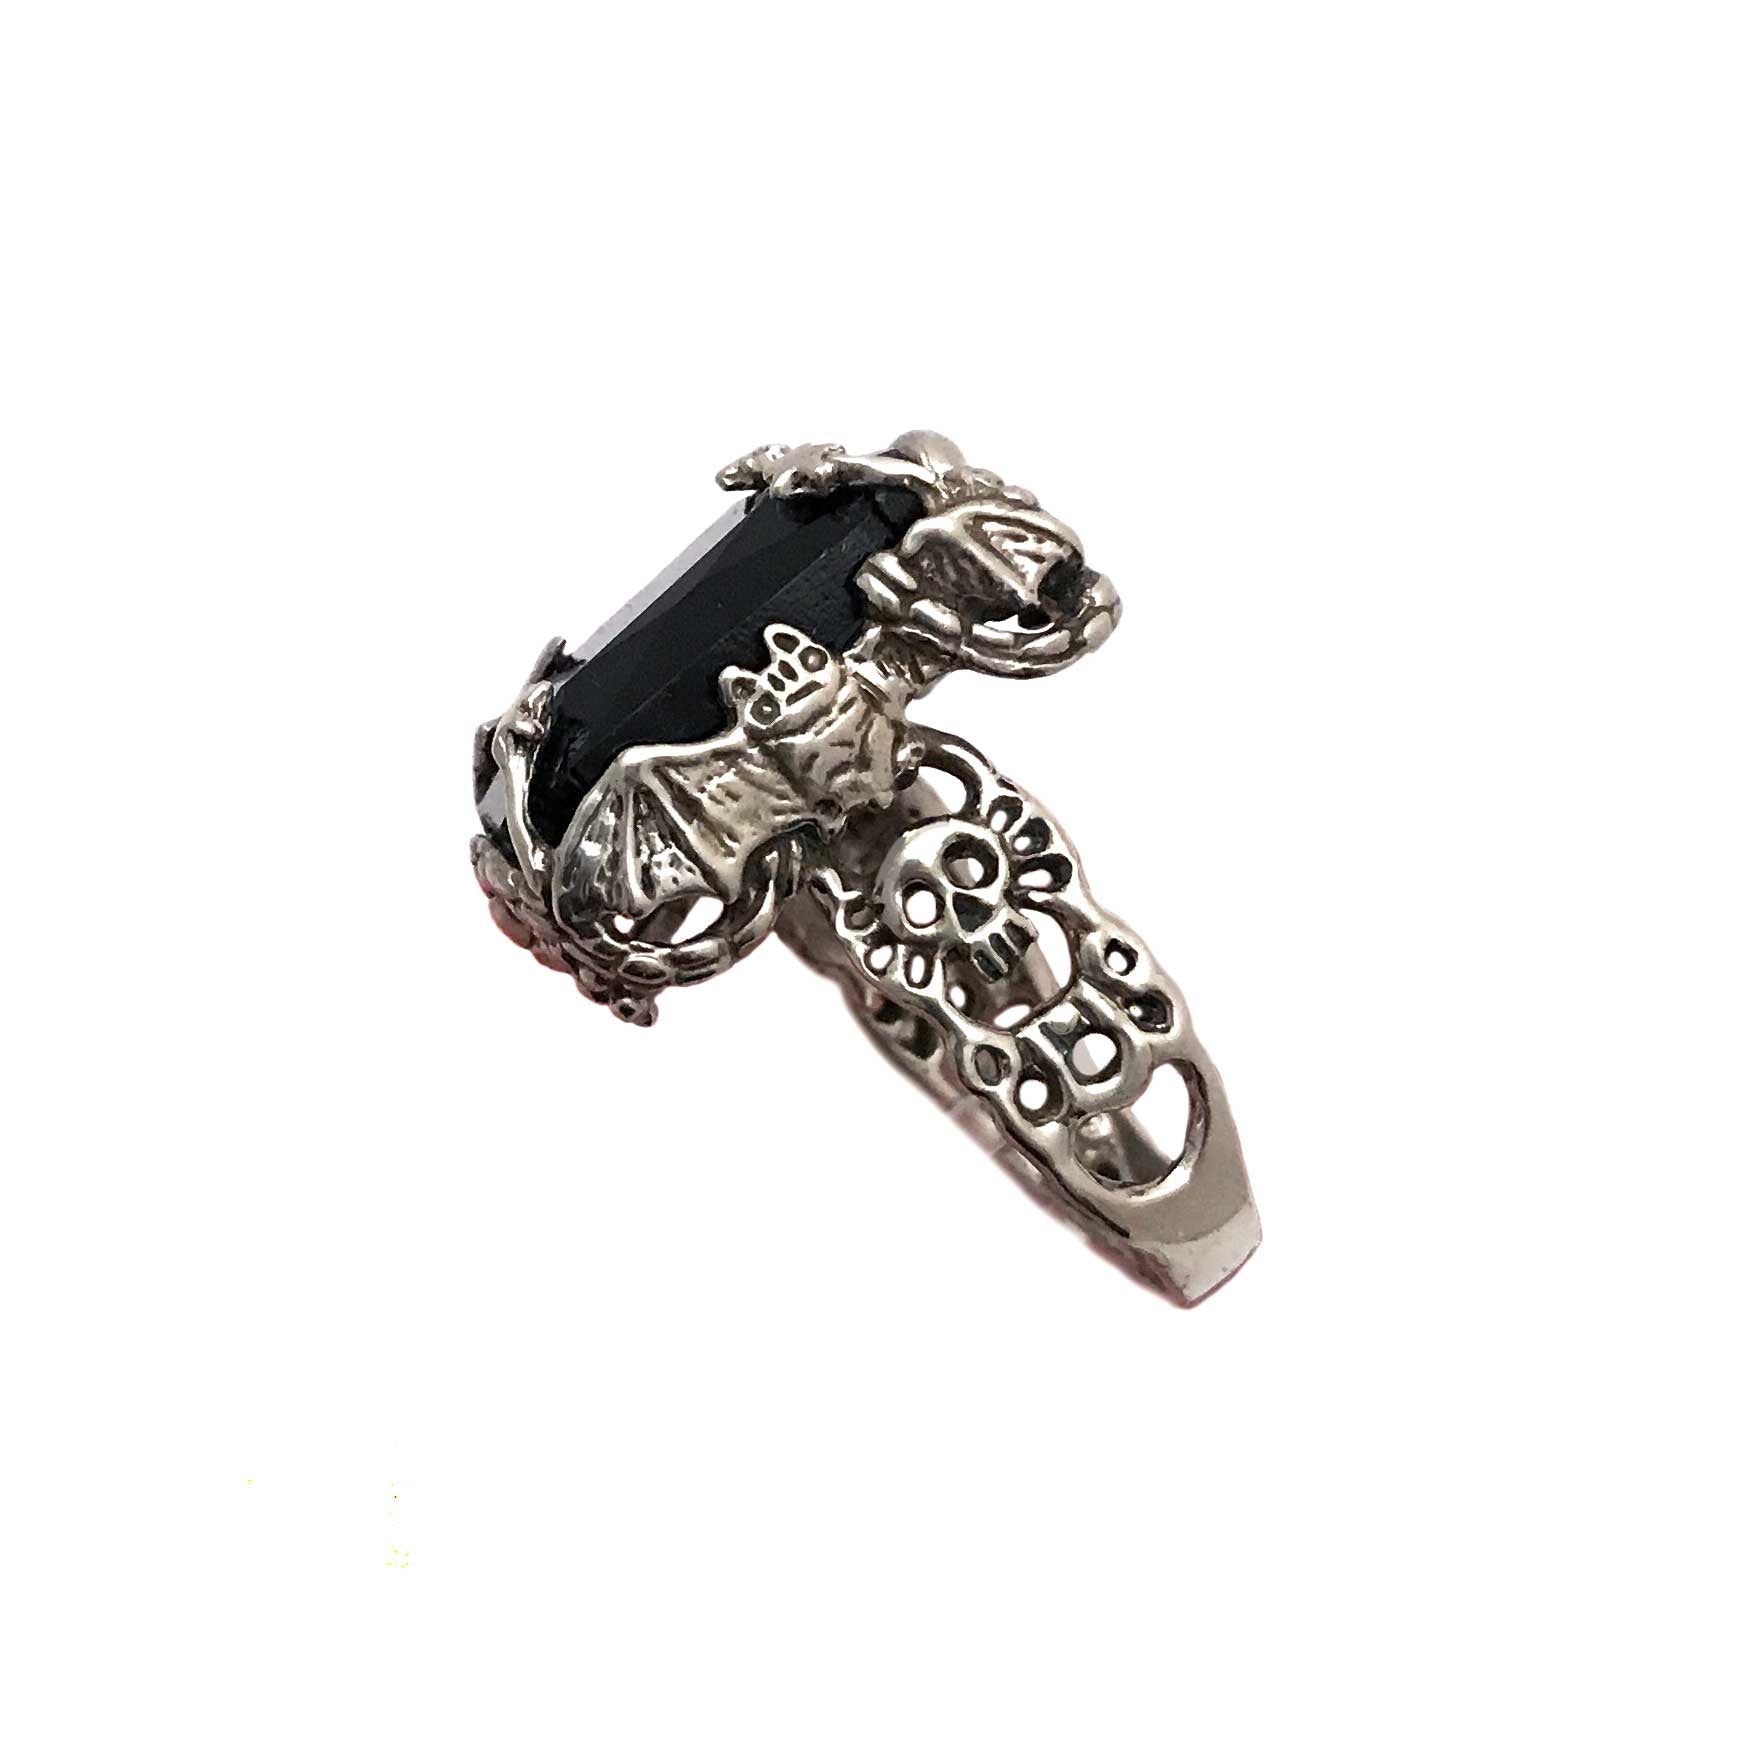 Bowie Ring in Black- Ready to Ship - Anomaly Jewelry